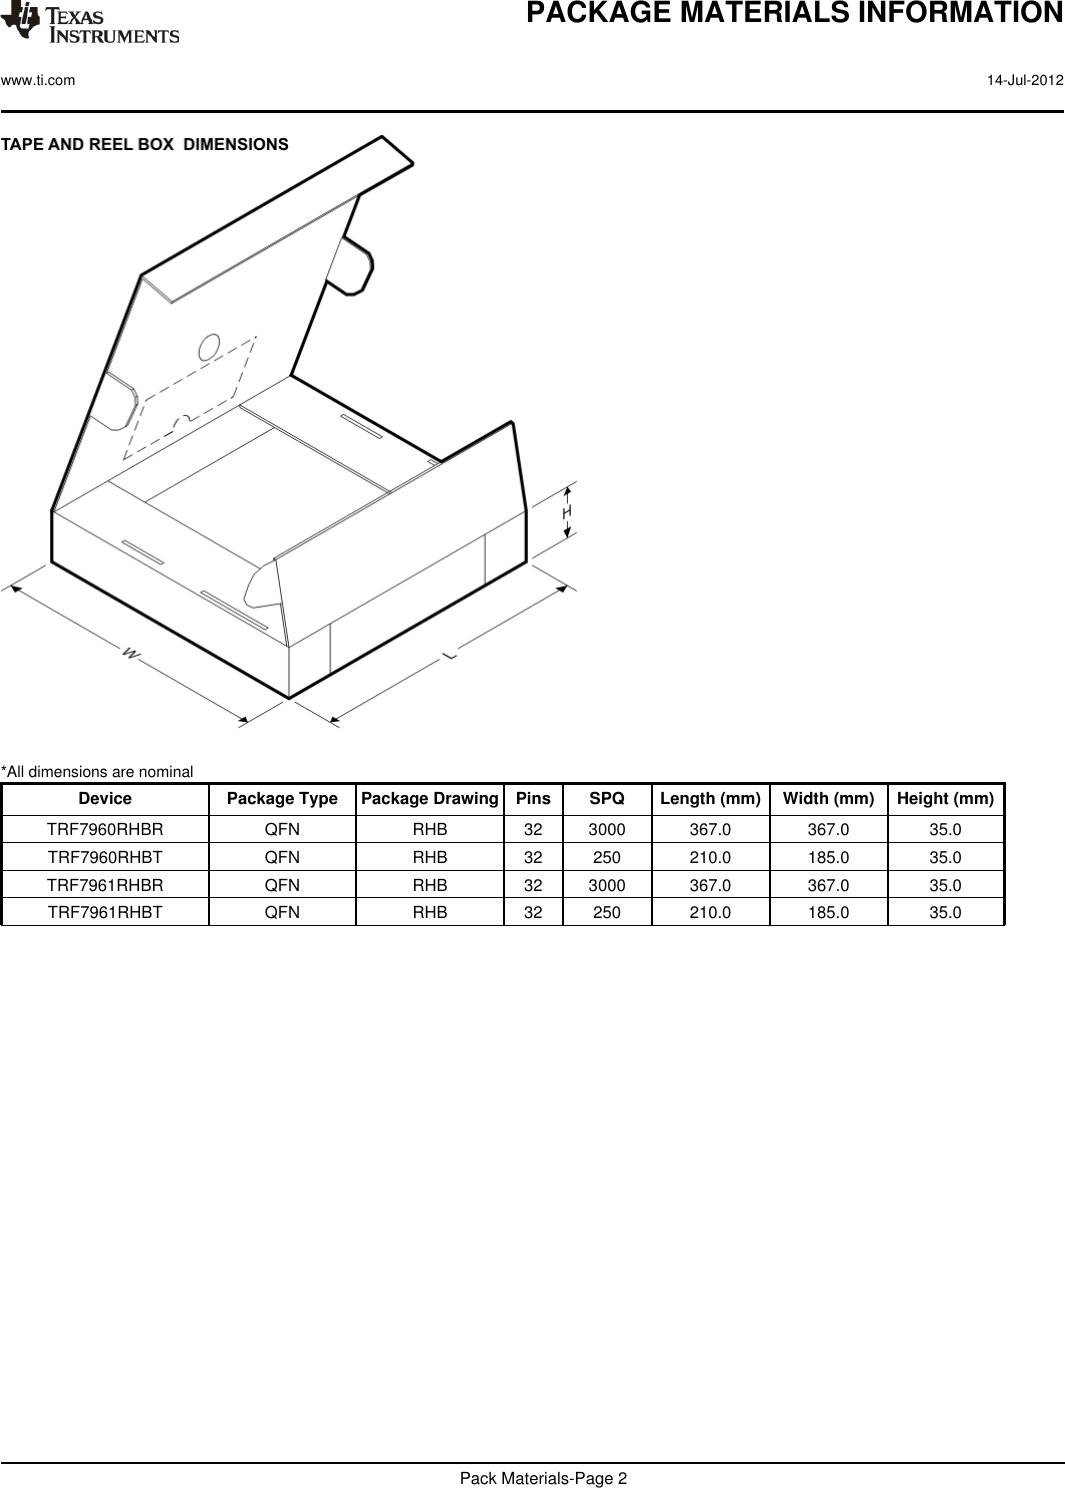 *All dimensions are nominalDevice Package Type Package Drawing Pins SPQ Length (mm) Width (mm) Height (mm)TRF7960RHBR QFN RHB 32 3000 367.0 367.0 35.0TRF7960RHBT QFN RHB 32 250 210.0 185.0 35.0TRF7961RHBR QFN RHB 32 3000 367.0 367.0 35.0TRF7961RHBT QFN RHB 32 250 210.0 185.0 35.0PACKAGE MATERIALS INFORMATIONwww.ti.com 14-Jul-2012Pack Materials-Page 2